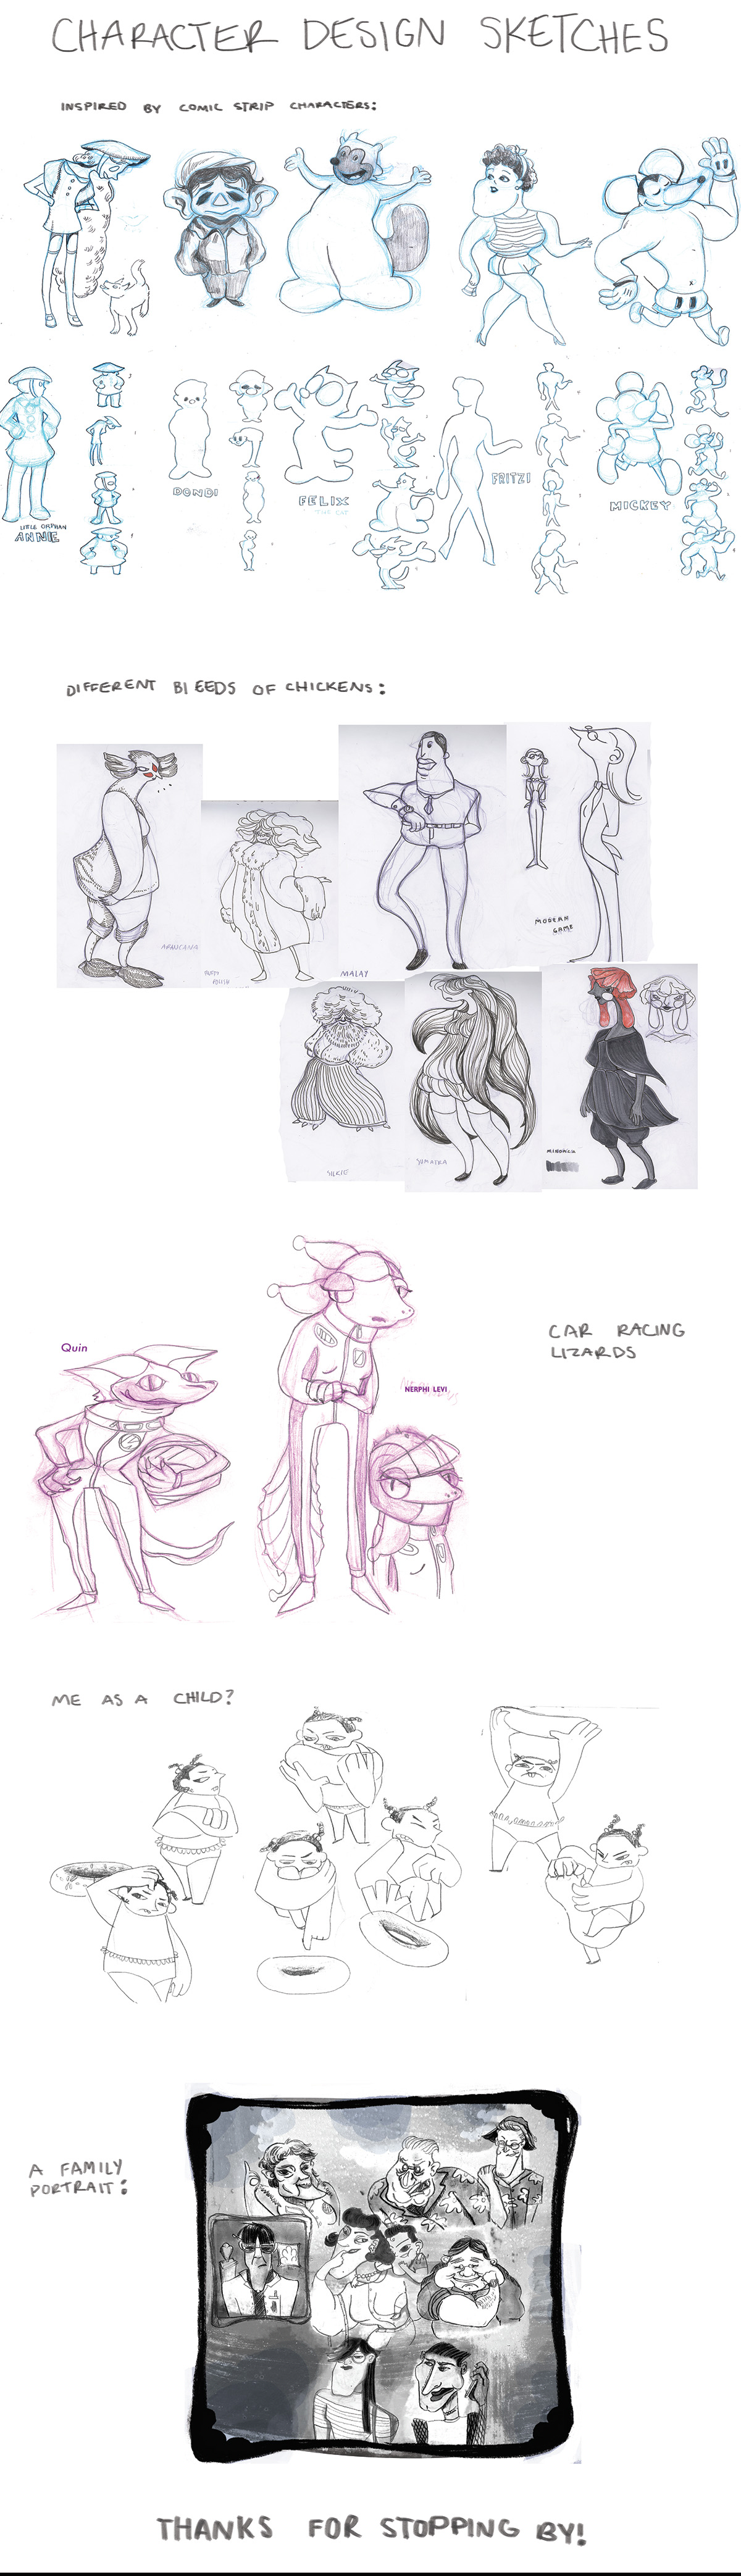 character sketch sketches design Character family portrait comic animation 